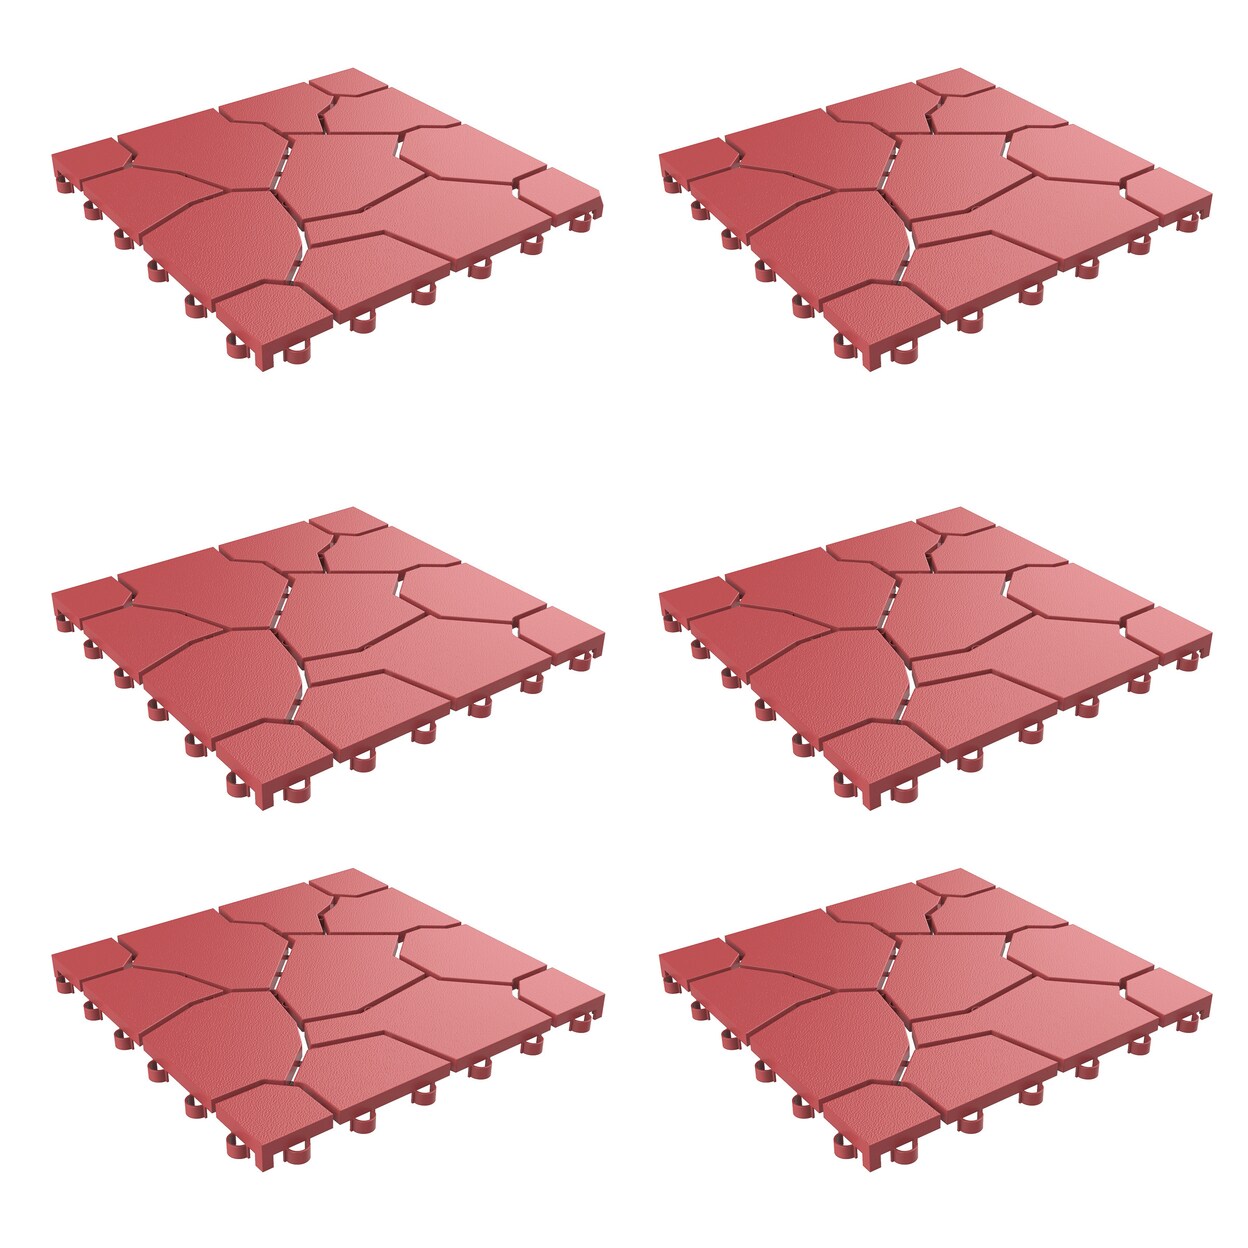 Pure Garden Outdoor Patio Deck Easy Snap Tiles 11.5 x 11.5 Set of 6 Water Drainage Red